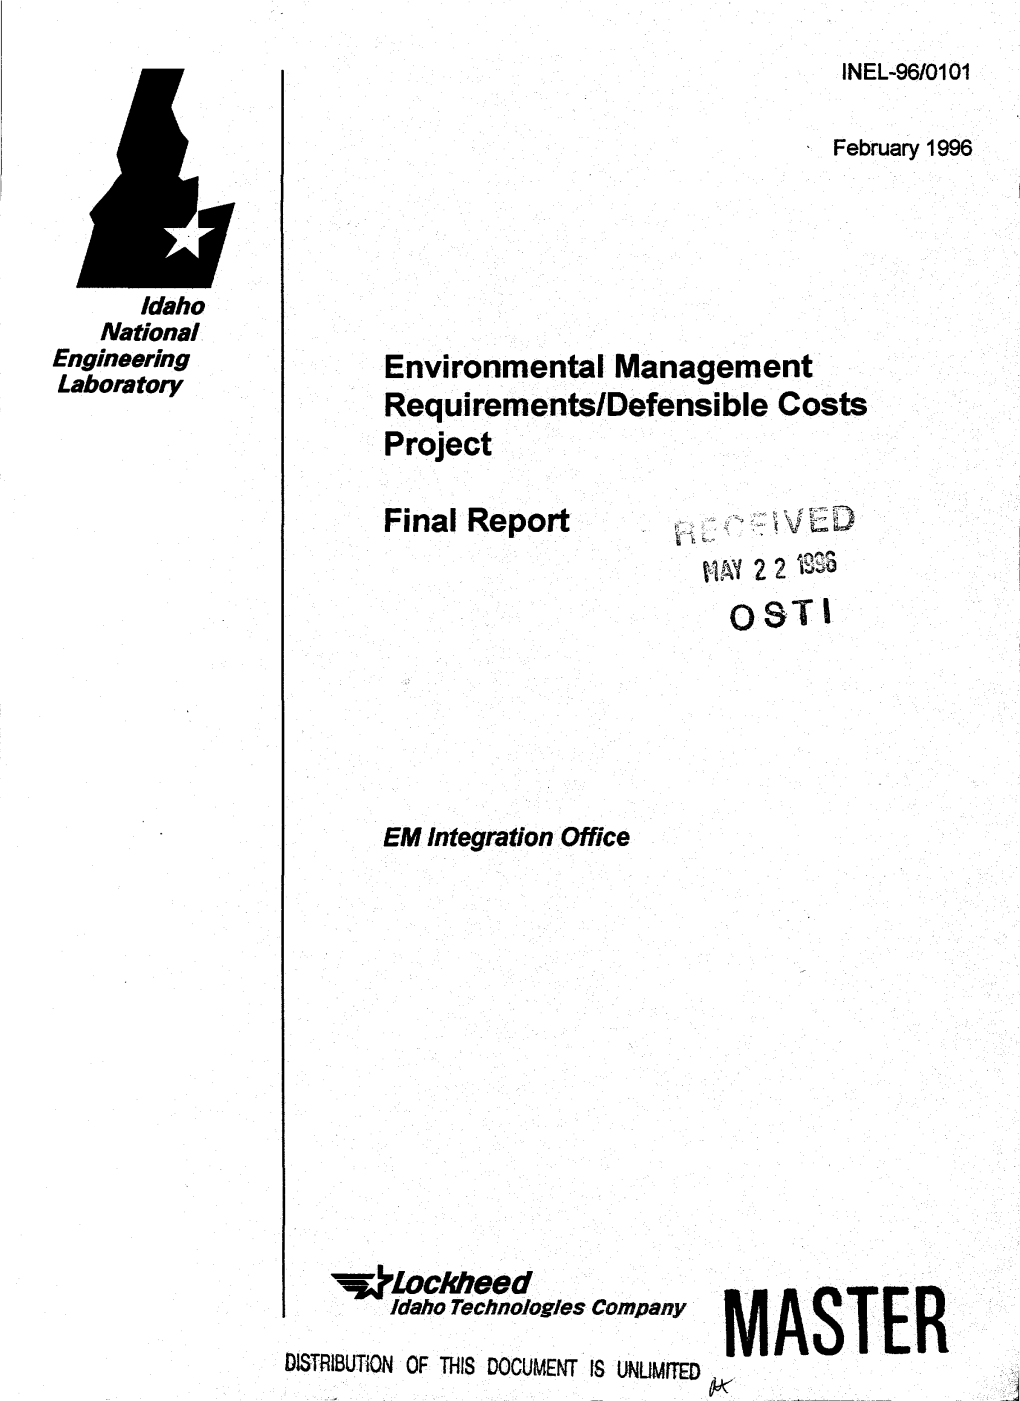 Environmental Management Requirements/Defensible Costs